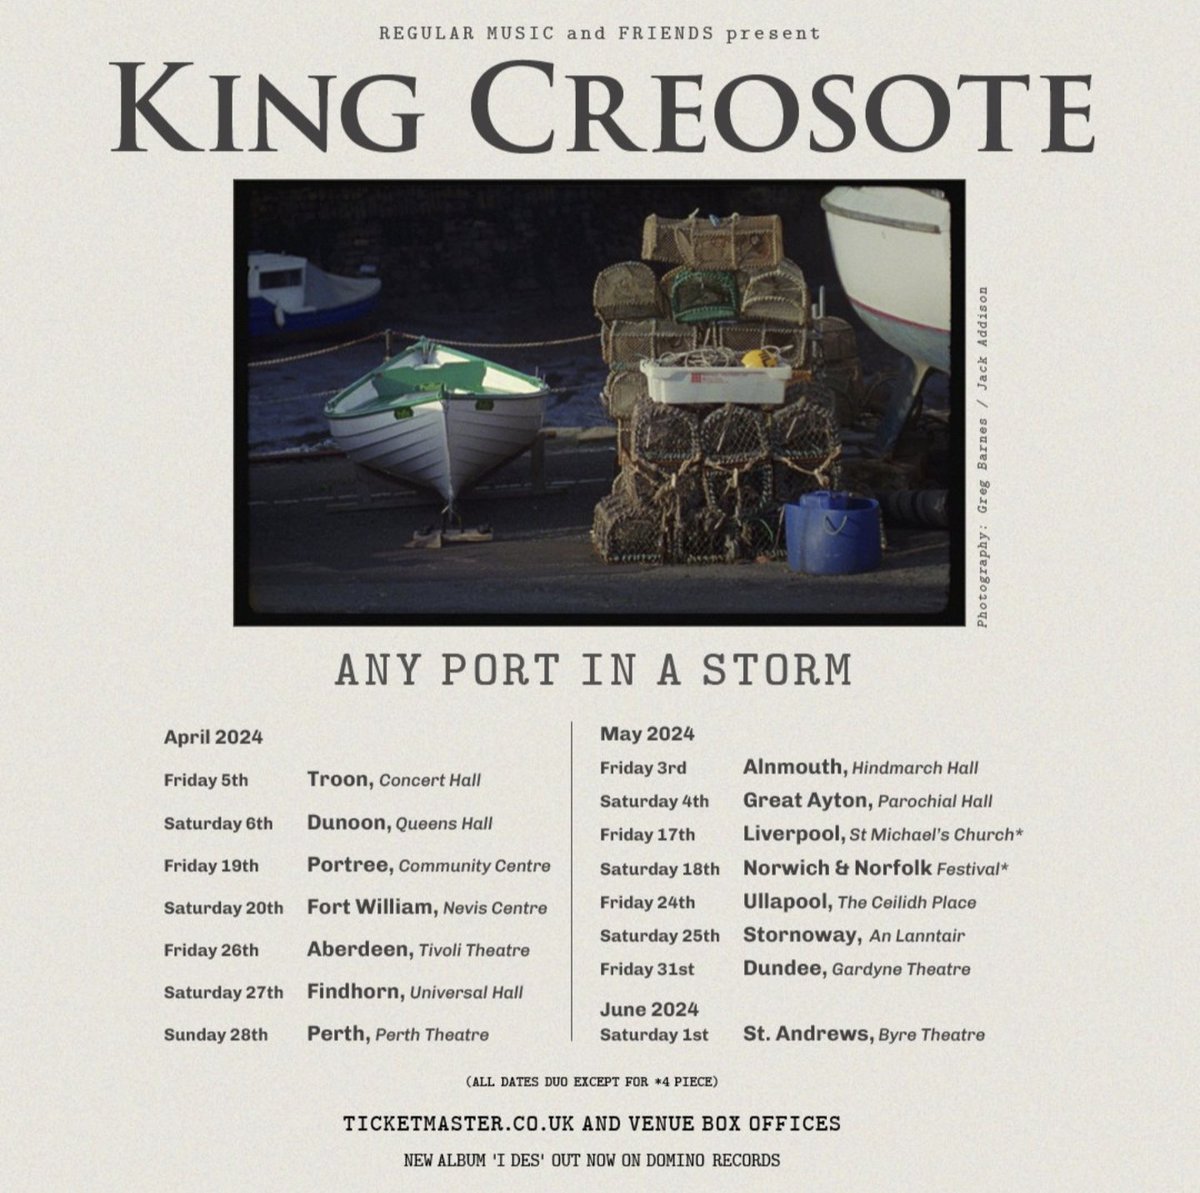 I have two tickets for this. King Creosote - Any Port in a storm. The tickets are £31 each but will accept £20 each. I have the physical tickets & can meet you anywhere in Dunoon. At the venue, in a bar. Gives a shout 🎟️🎟️